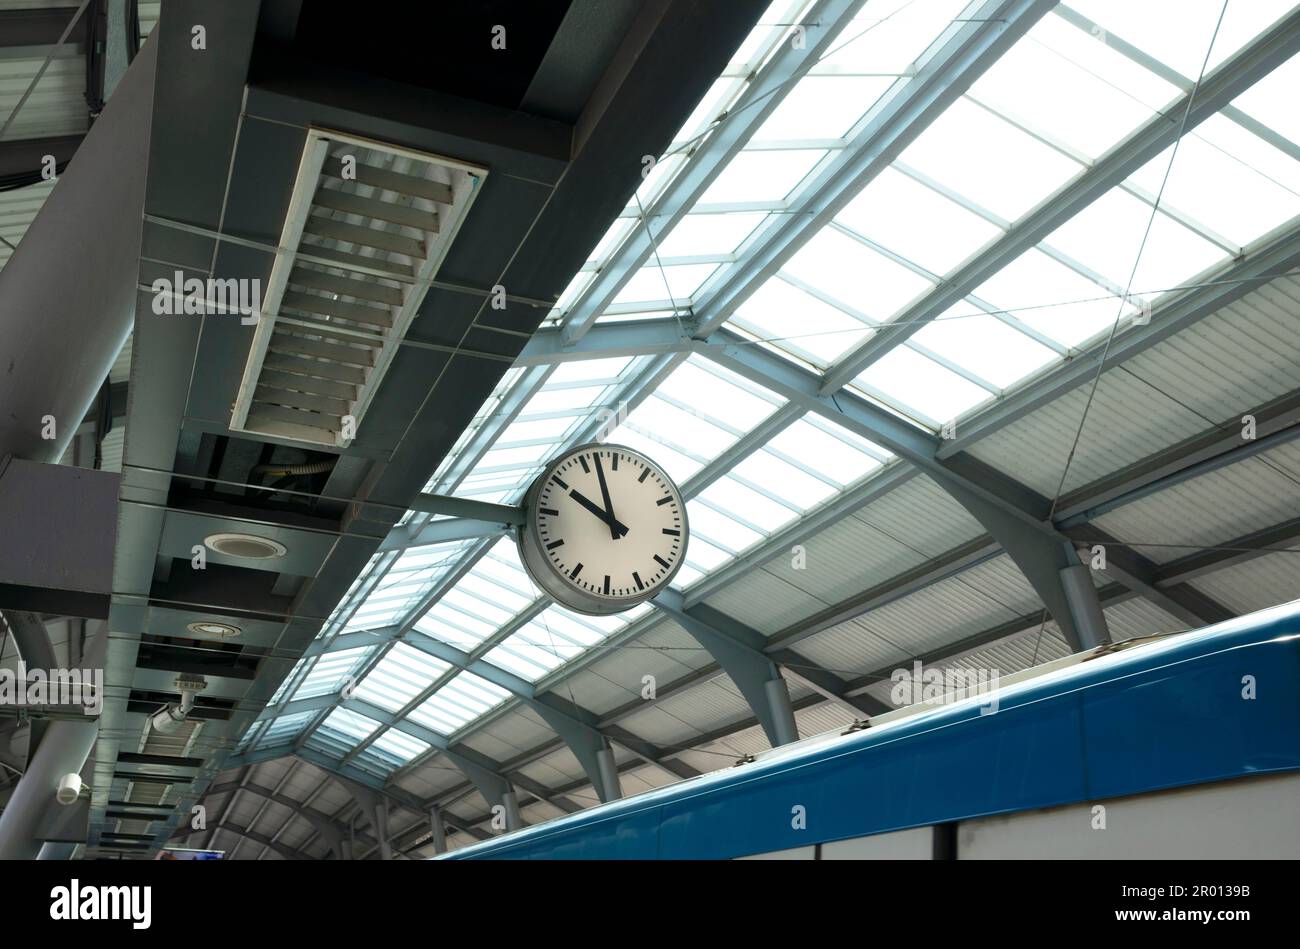 Public clock in sky train station with cctv. Stock Photo